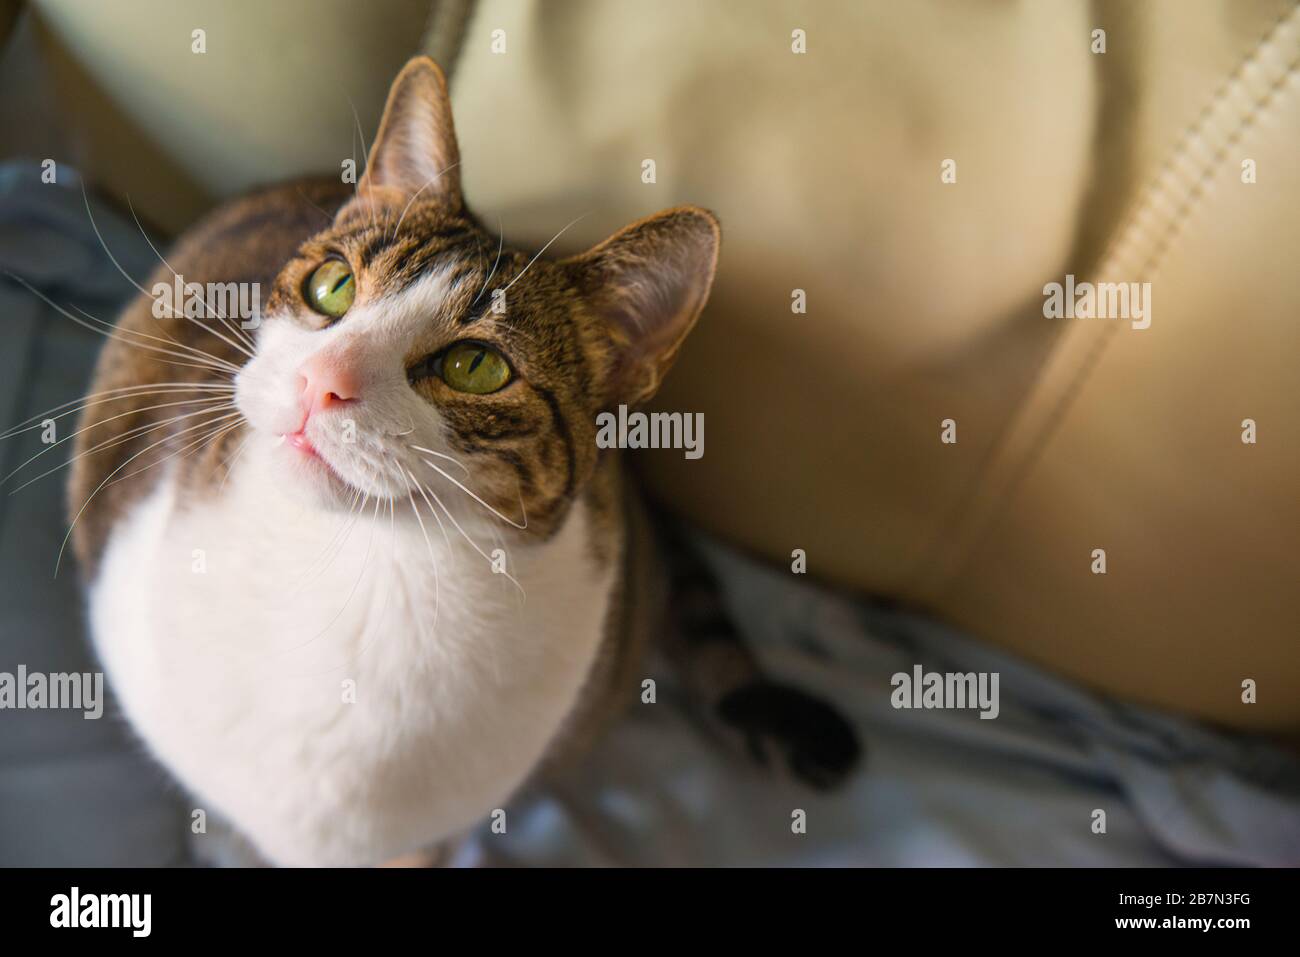 Tabby and white cat looking up. Stock Photo